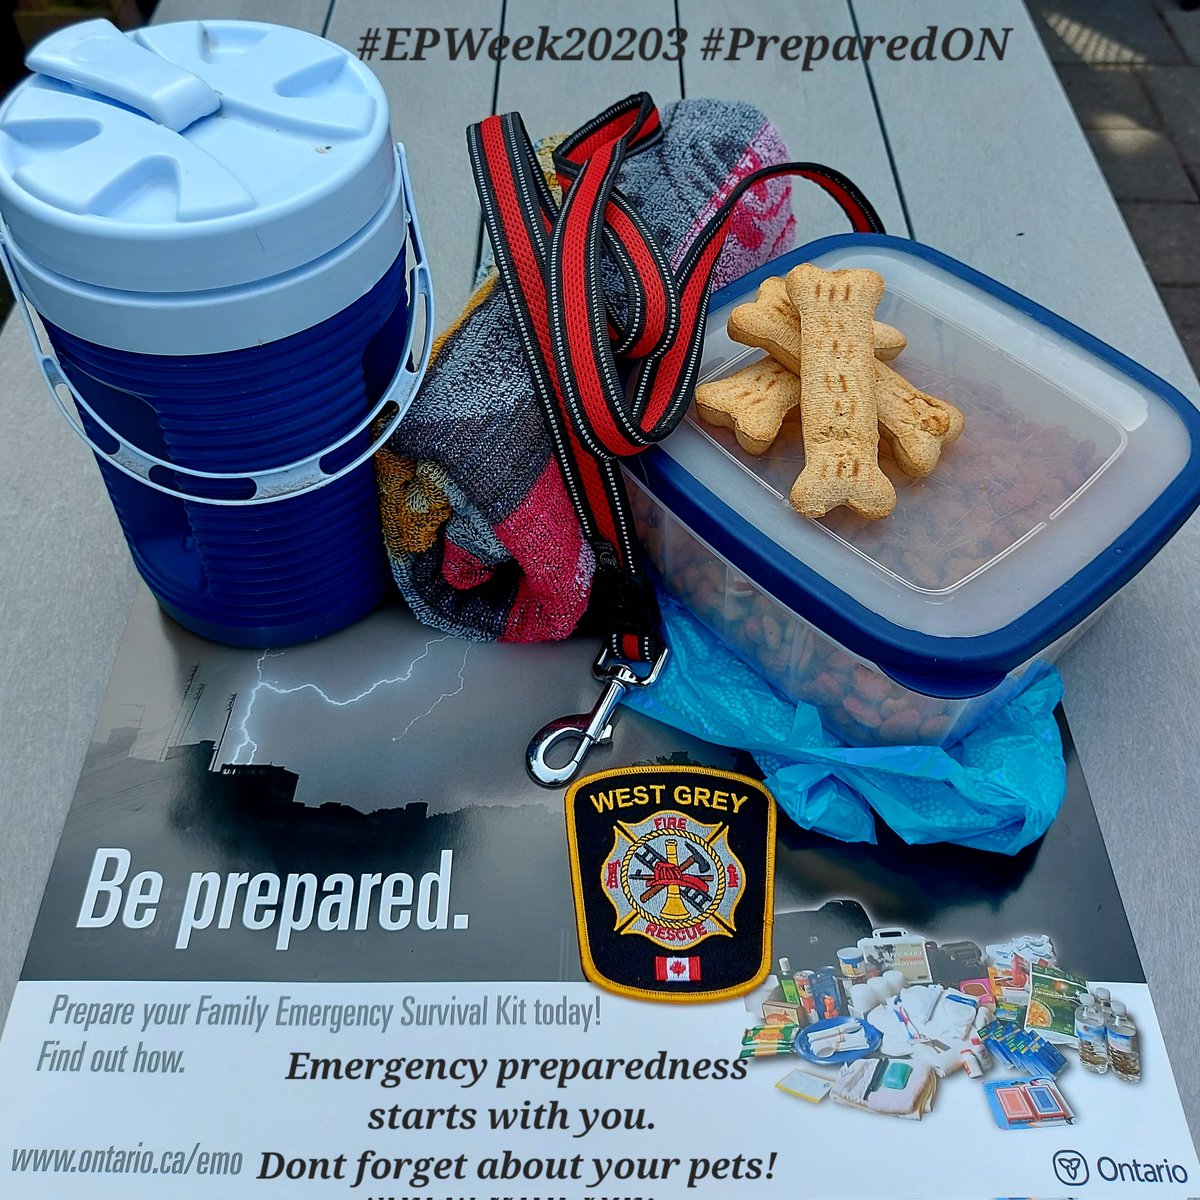 It's #EPWeek2023 
When preparing your Emergency Kit, don't forget about your pets 🐶🐱
Ensure you, your family and pets have supplies for 72hours.
Be Prepared, Not Scared 
#PreparedON 
@OurWestGrey 
@DundalkFire you're up #GreyCountyChiefsChallenge